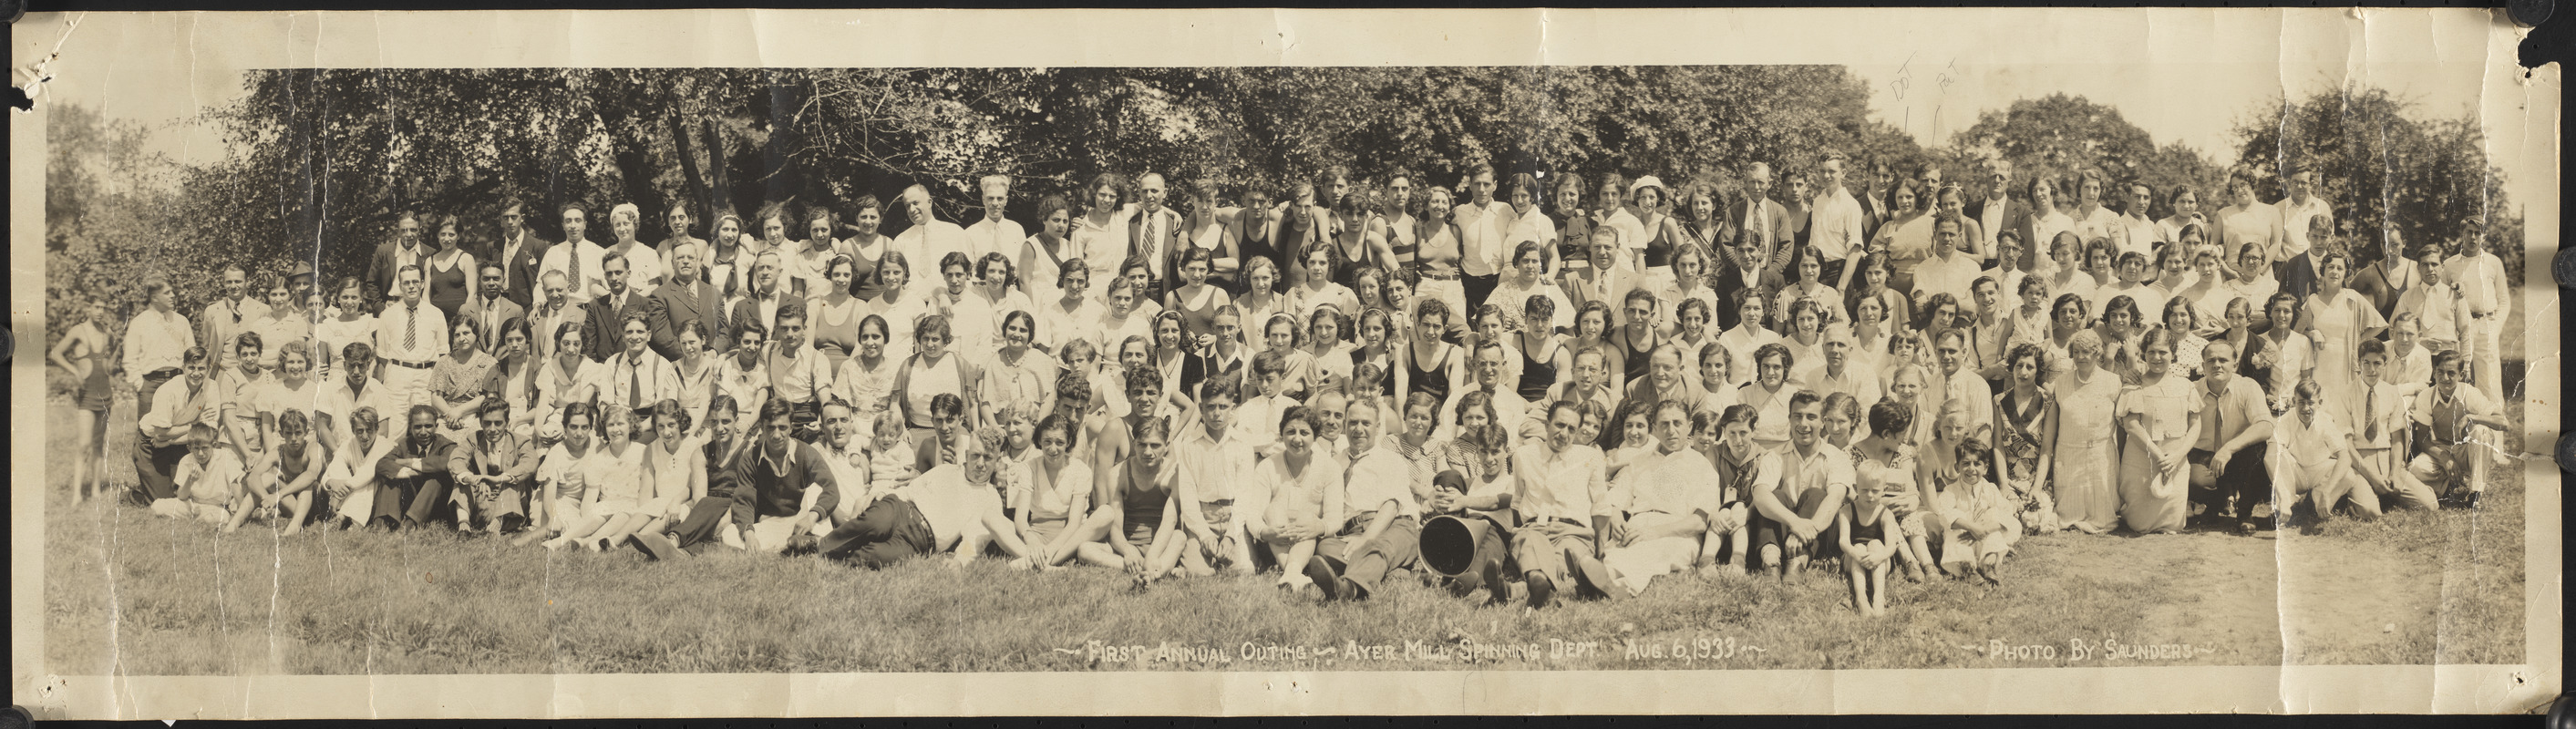 First annual outing, Ayer Mill spinning dept. Aug 6, 1933